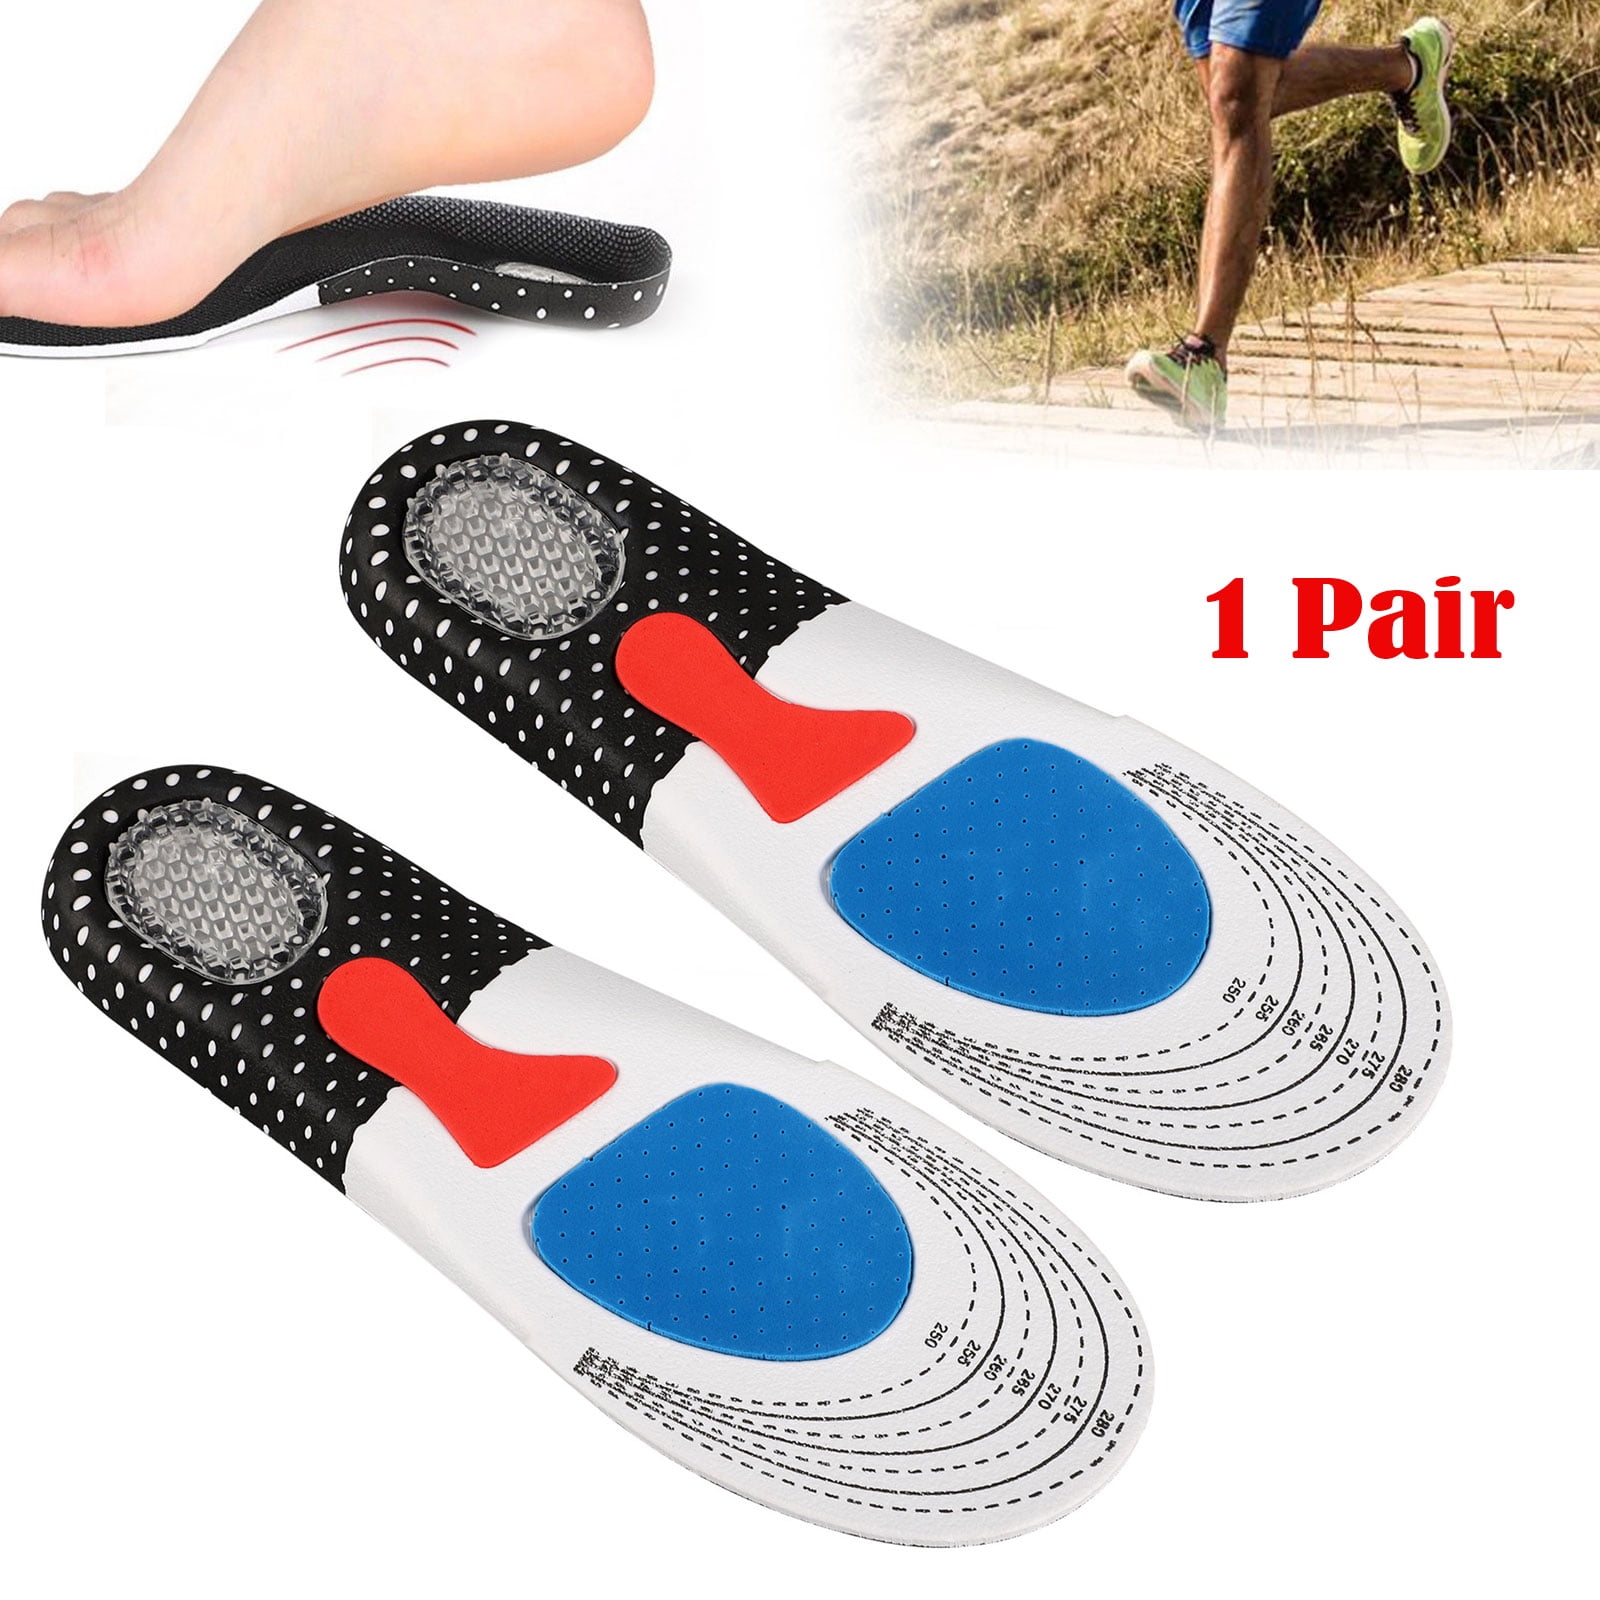 Men Gel Orthotic Sport Running Insoles Insert Shoe Pad Arch Support Cushion KD 